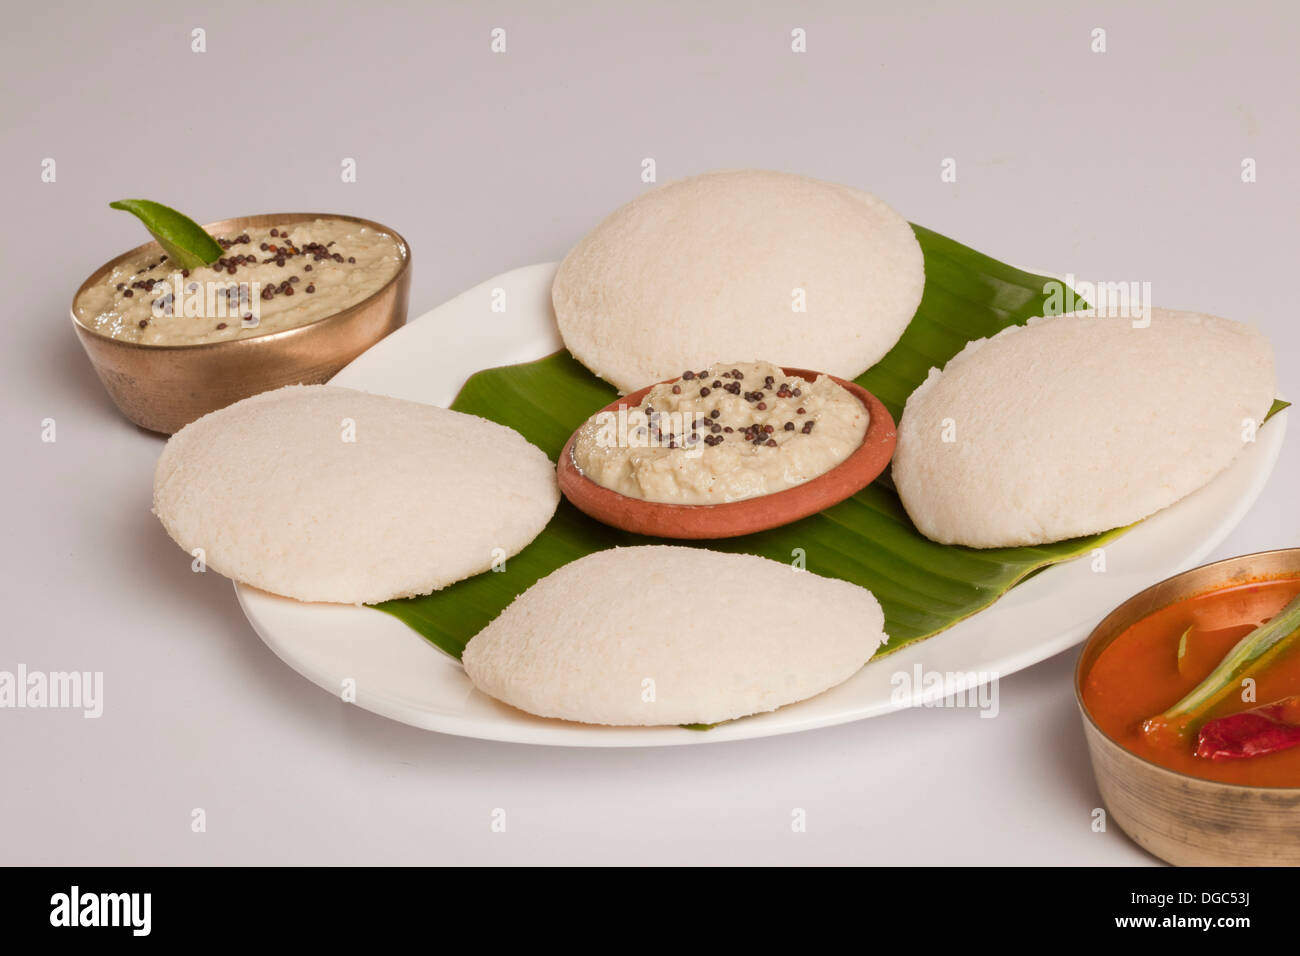 Idli is a South Indian breakfast dish served on banana leaf Stock Photo